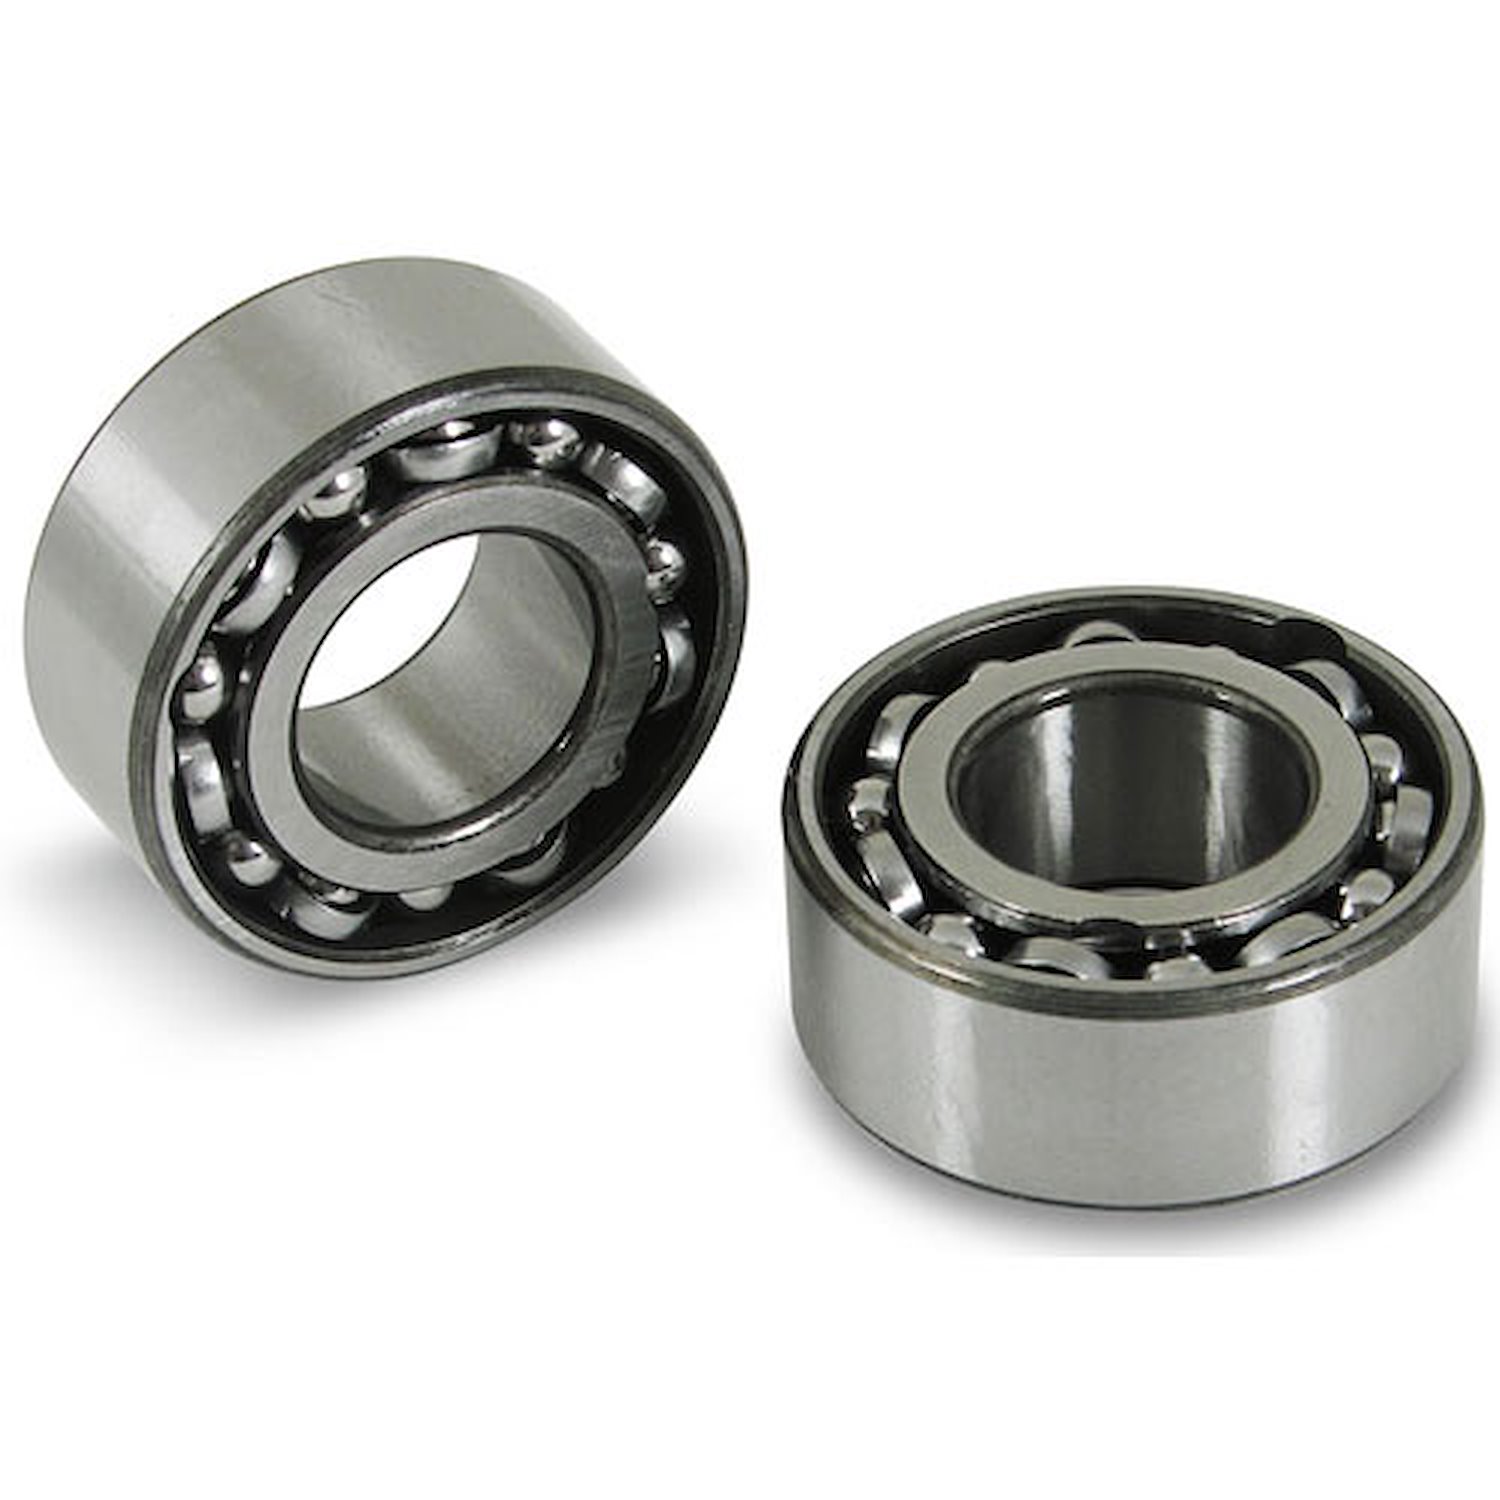 Supercharger Bearings For Bearing plate 925-7051